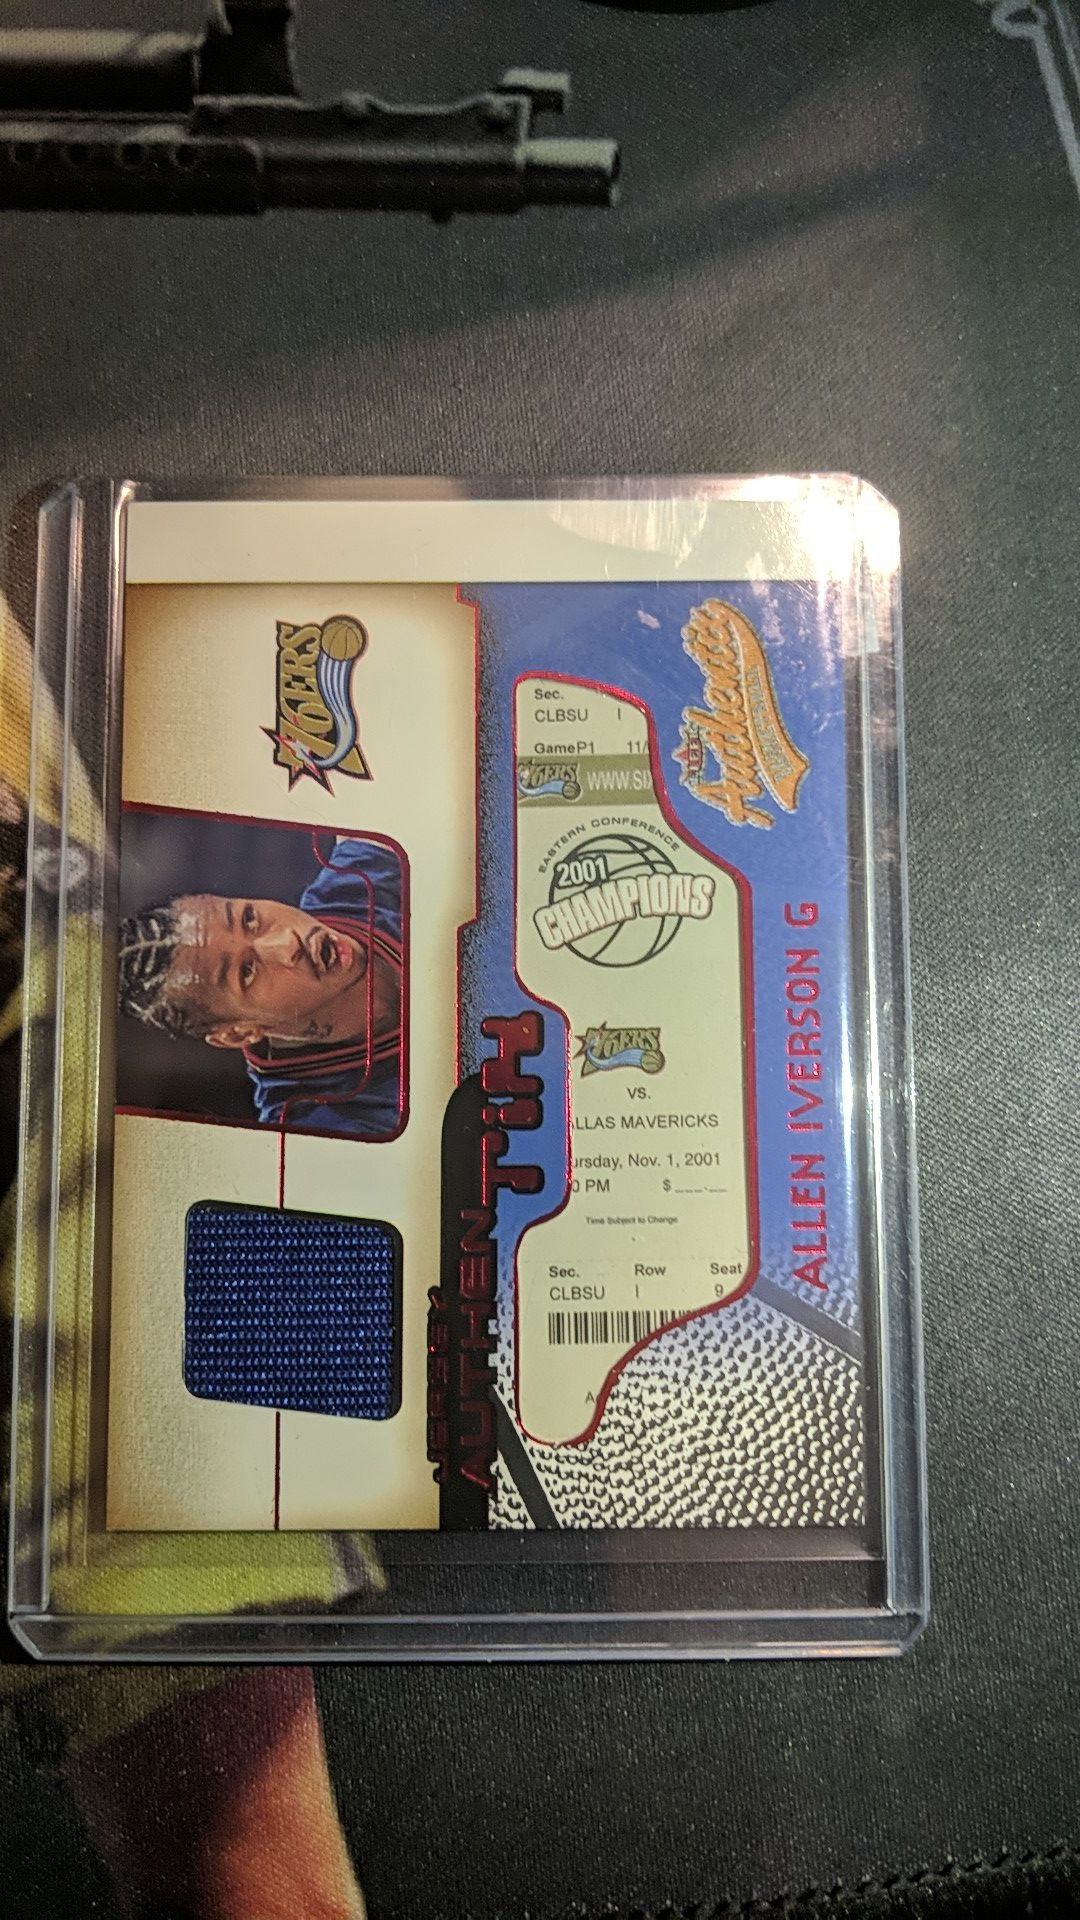 Allen Iverson Game ticket and patch